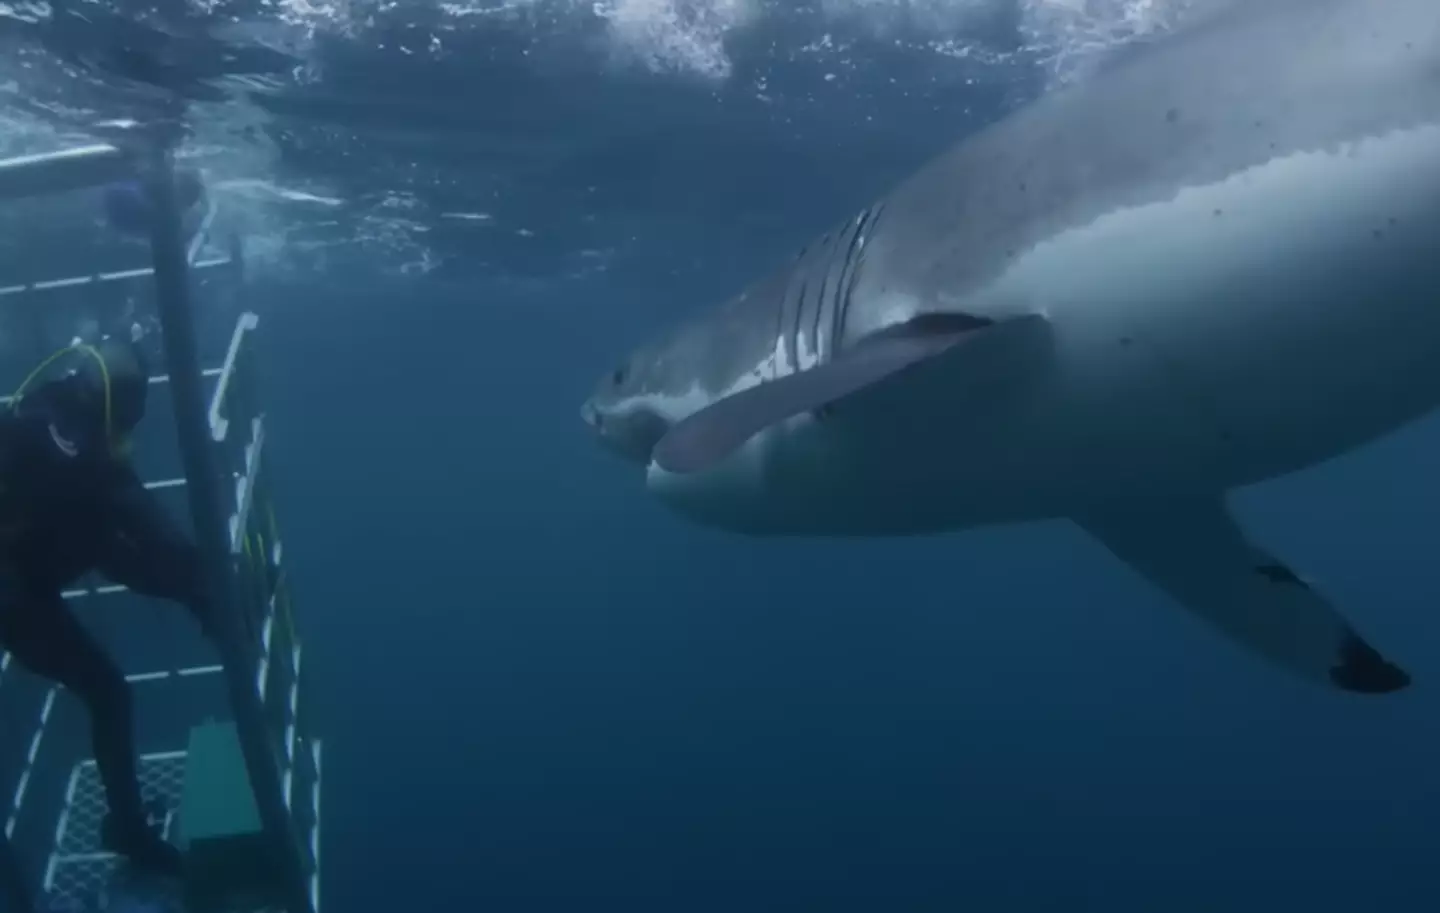 The 18-foot shark attacked Brandon McMillan's cage. Discovery